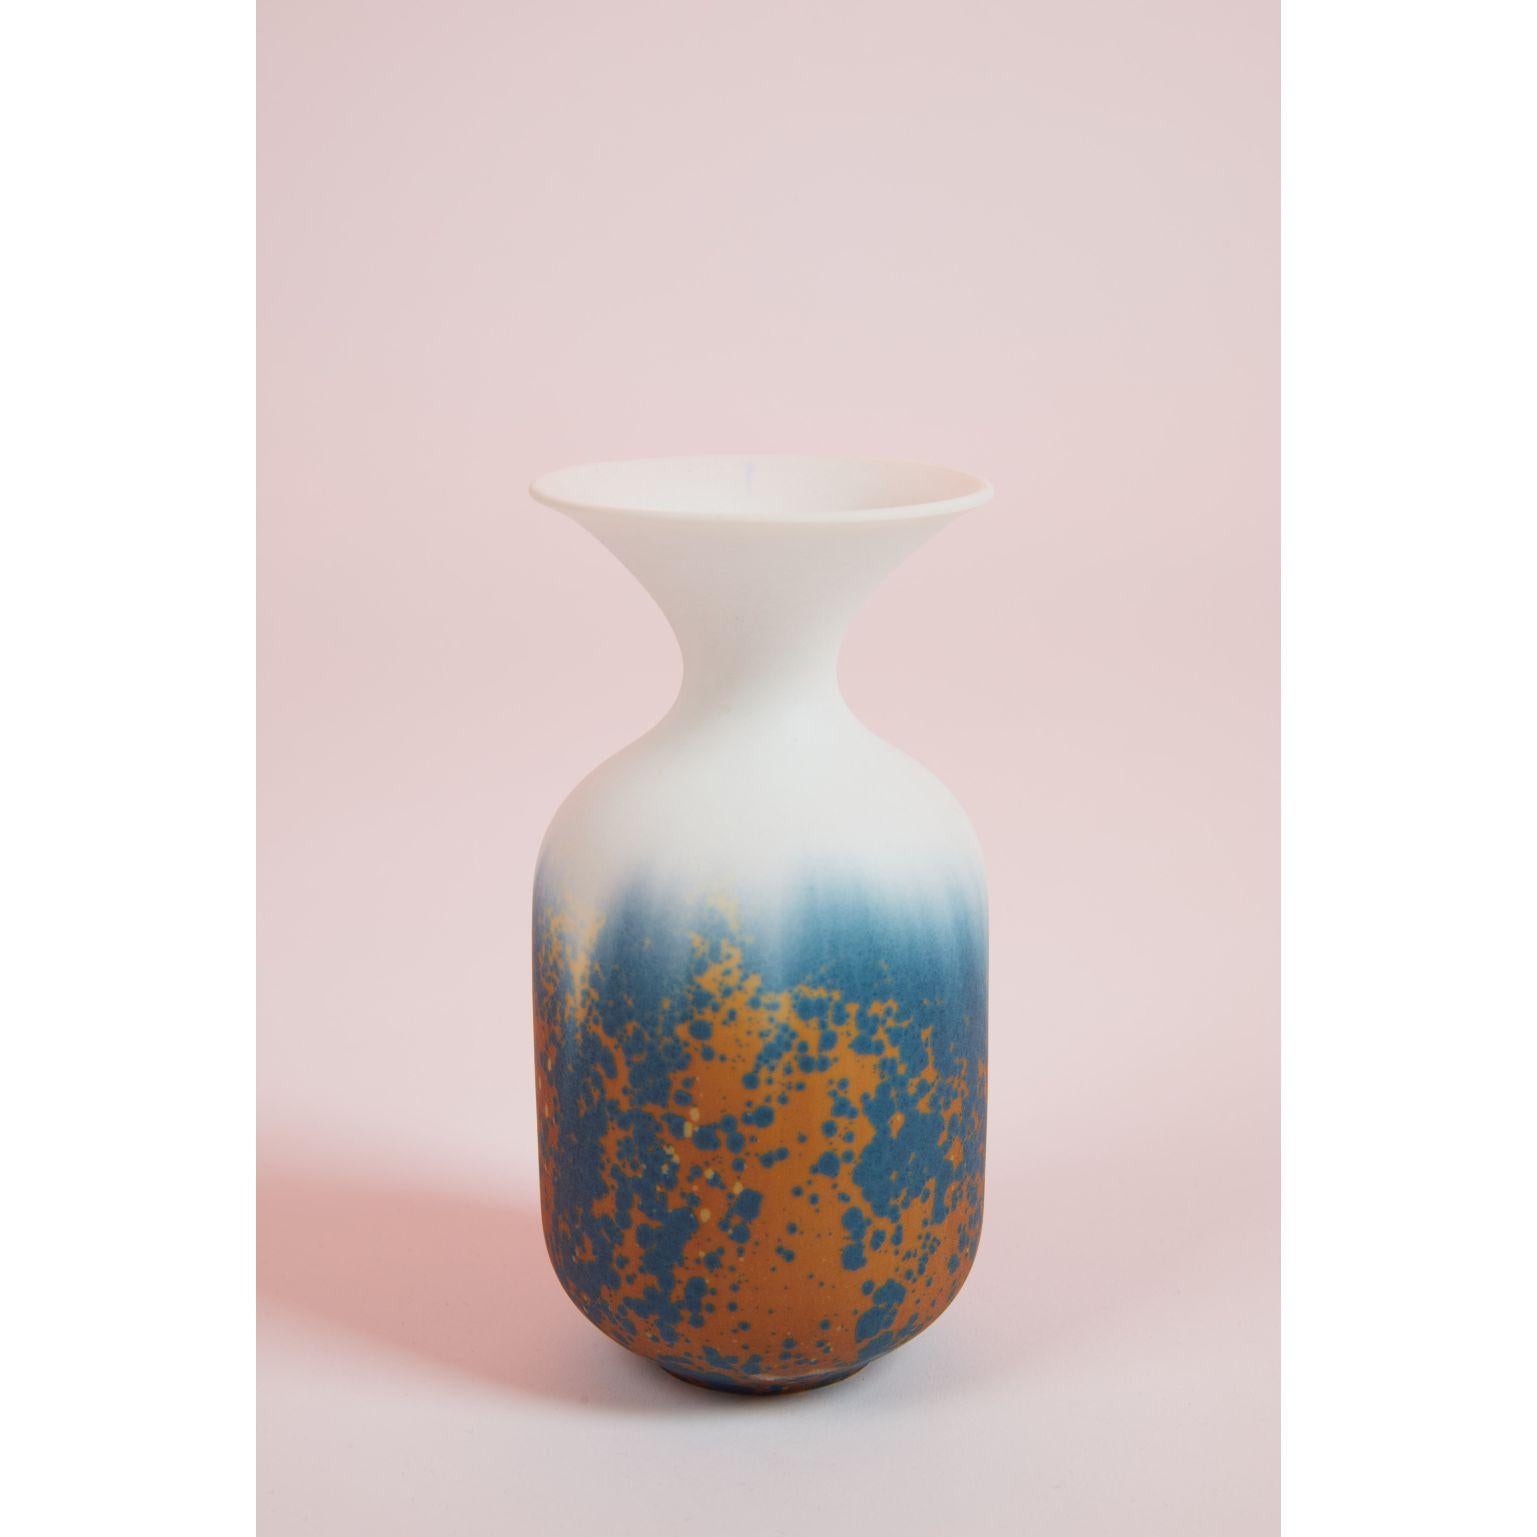 Trumpet vase by Milan Pekar
Dimensions: d x h 10 cm
Materials: Matt Barium Blue Glaze with Nickel Oxide, Porcelain

handmade in the Czech Republic. 

Also Available: different colors and patterns

Established own studio August 2009 – Focus